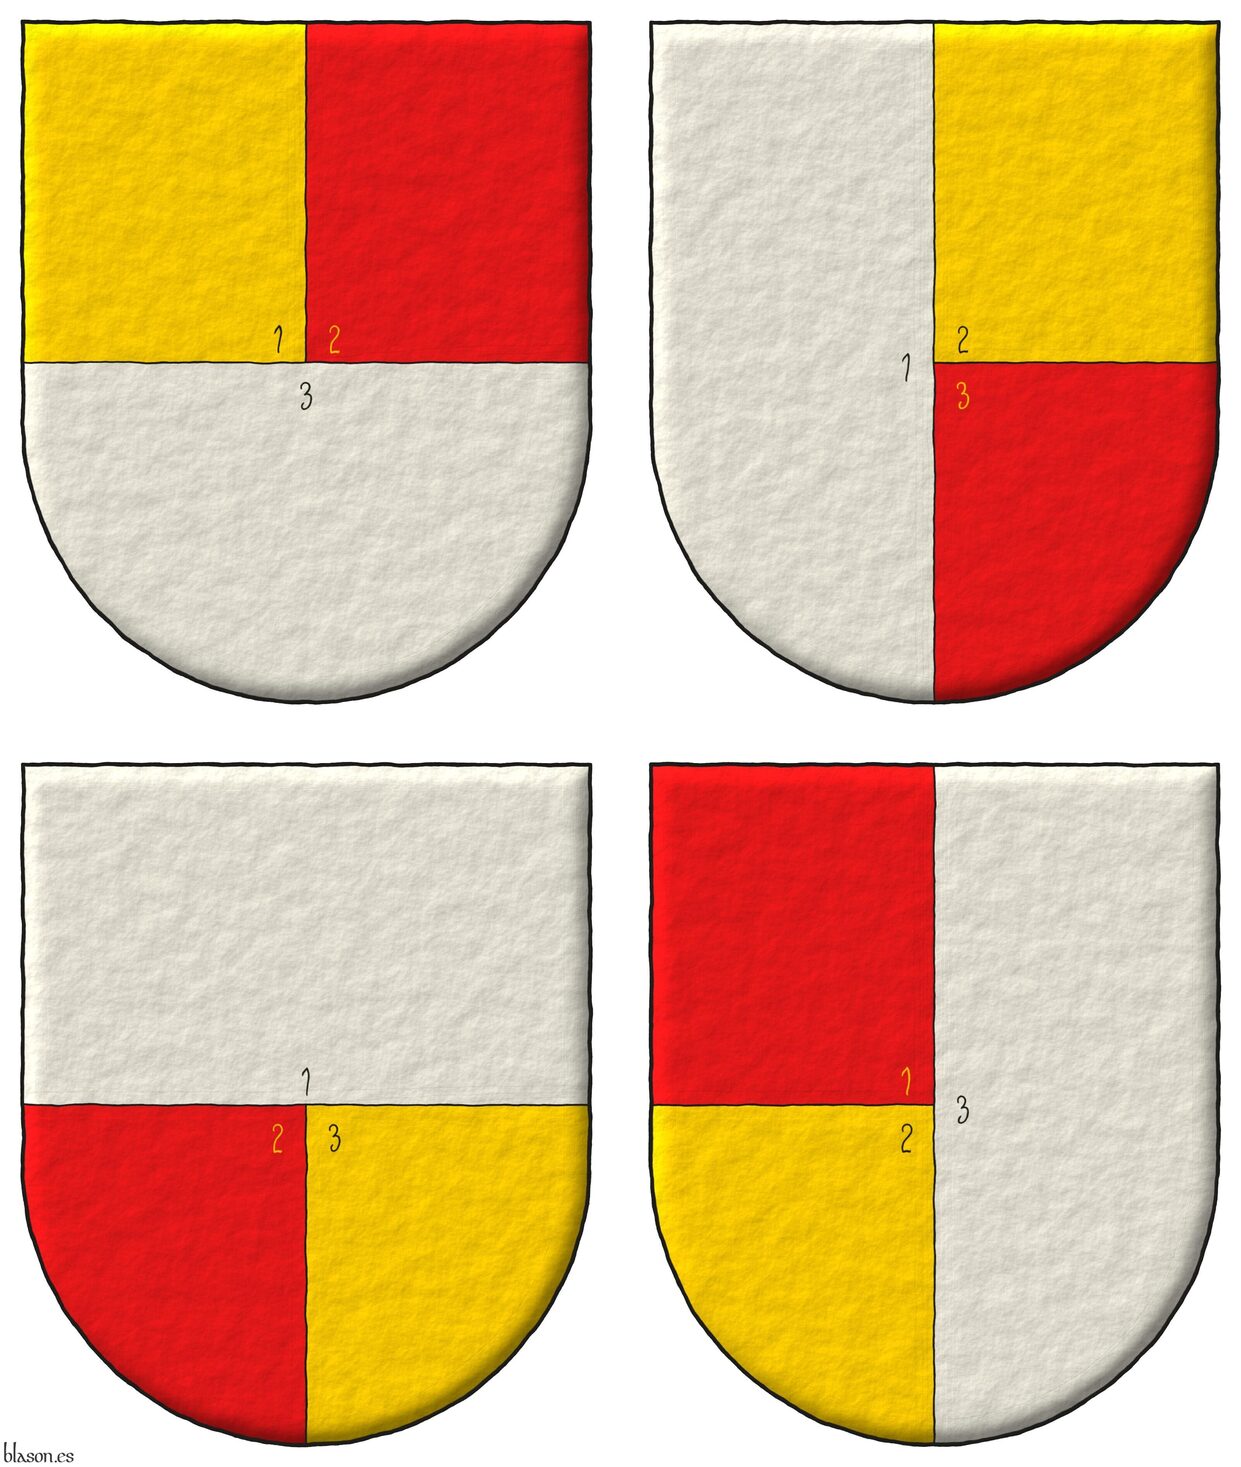 Party per fess, the chief per pale: 1 Or; 2 Gules; 3 Argent.<br /> Party per pale, the sinister per fess: 1 Argent; 2 Or; 3 Gules.<br /> Party per fess, the base per pale; 1 Argent; 2 Gules; 3 Or.<br /> Per per pale, the dexter per fess: 1 Gules; 2 Or; 3 Argent.